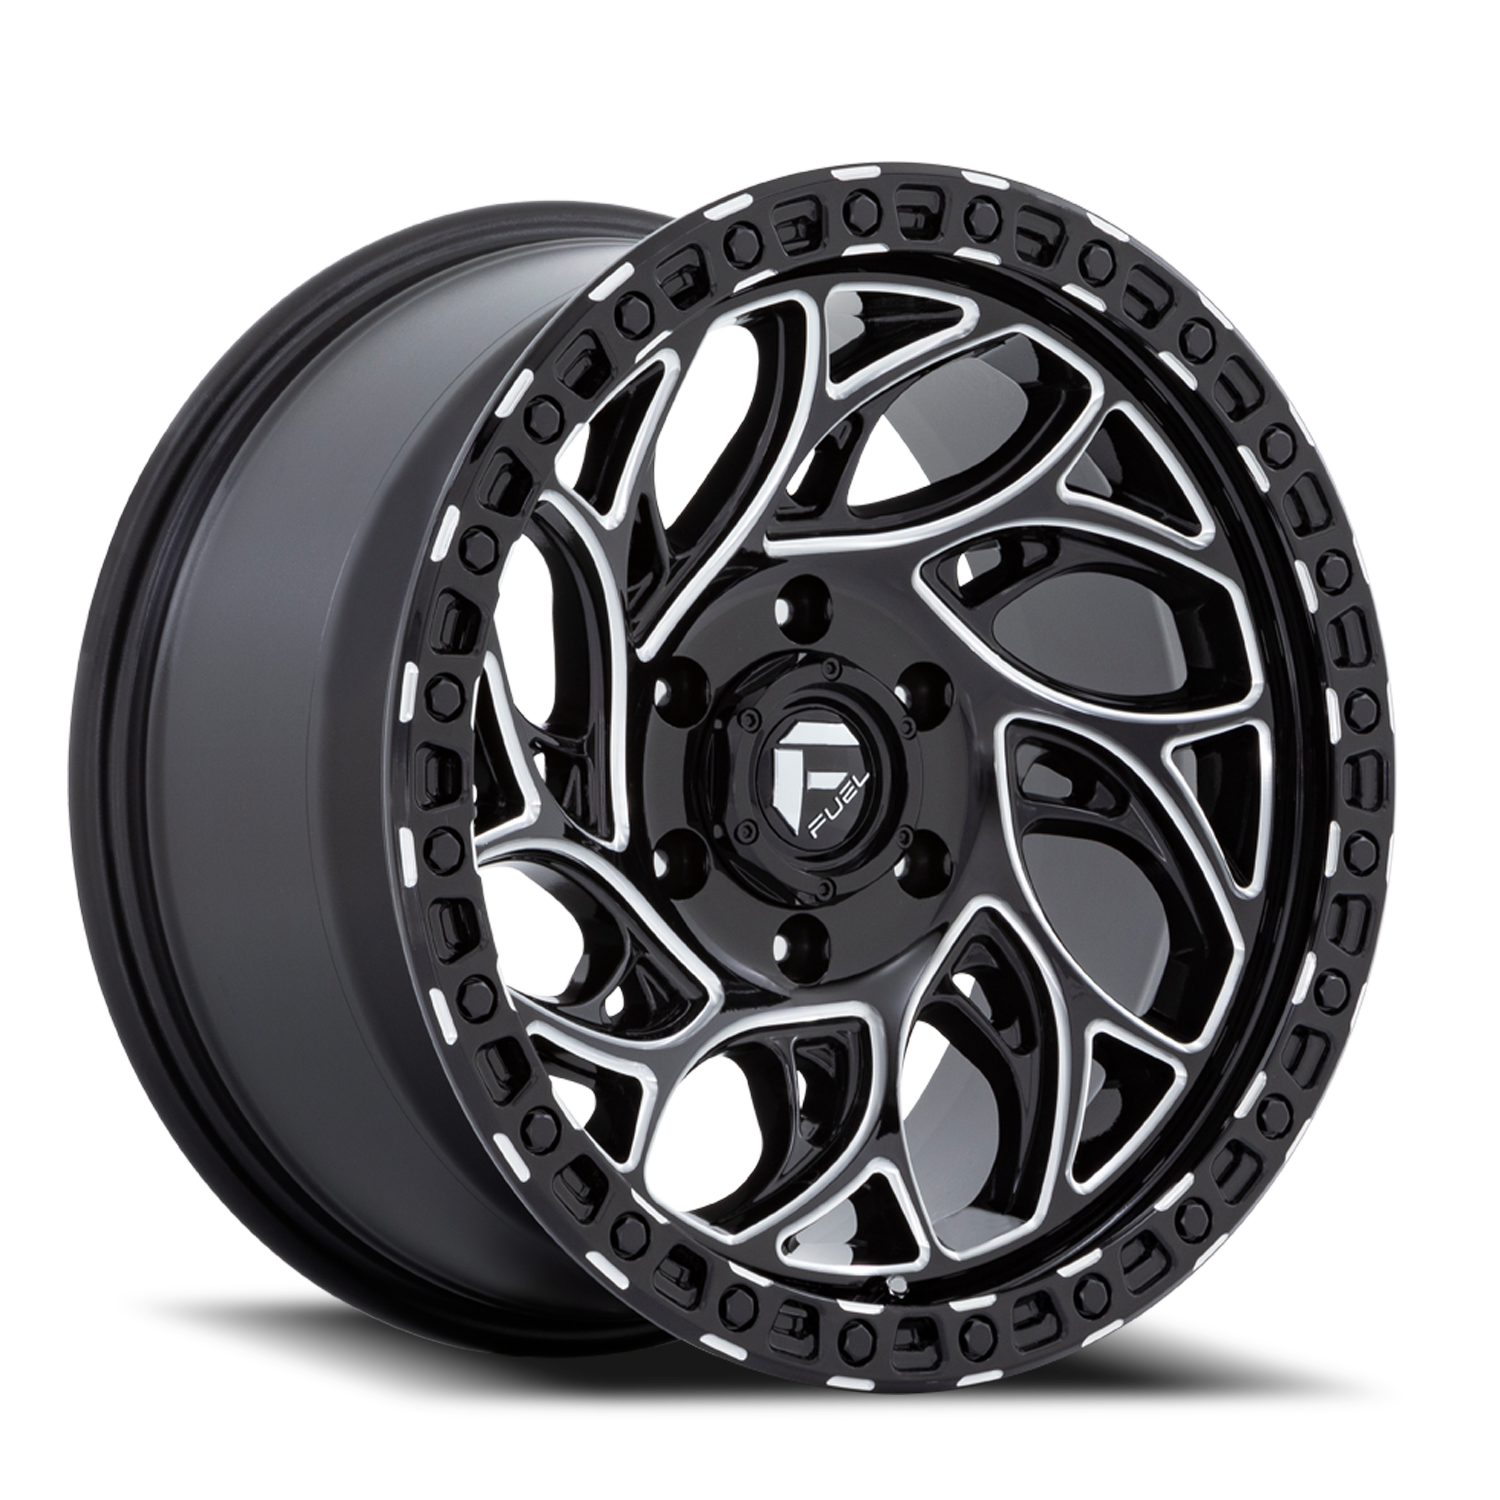 Aluminum Wheels 15X10 Runner OR D840 5 On 139.7 Gloss Black Milled 108 Bore -43 Offset Fuel Off Road Wheels